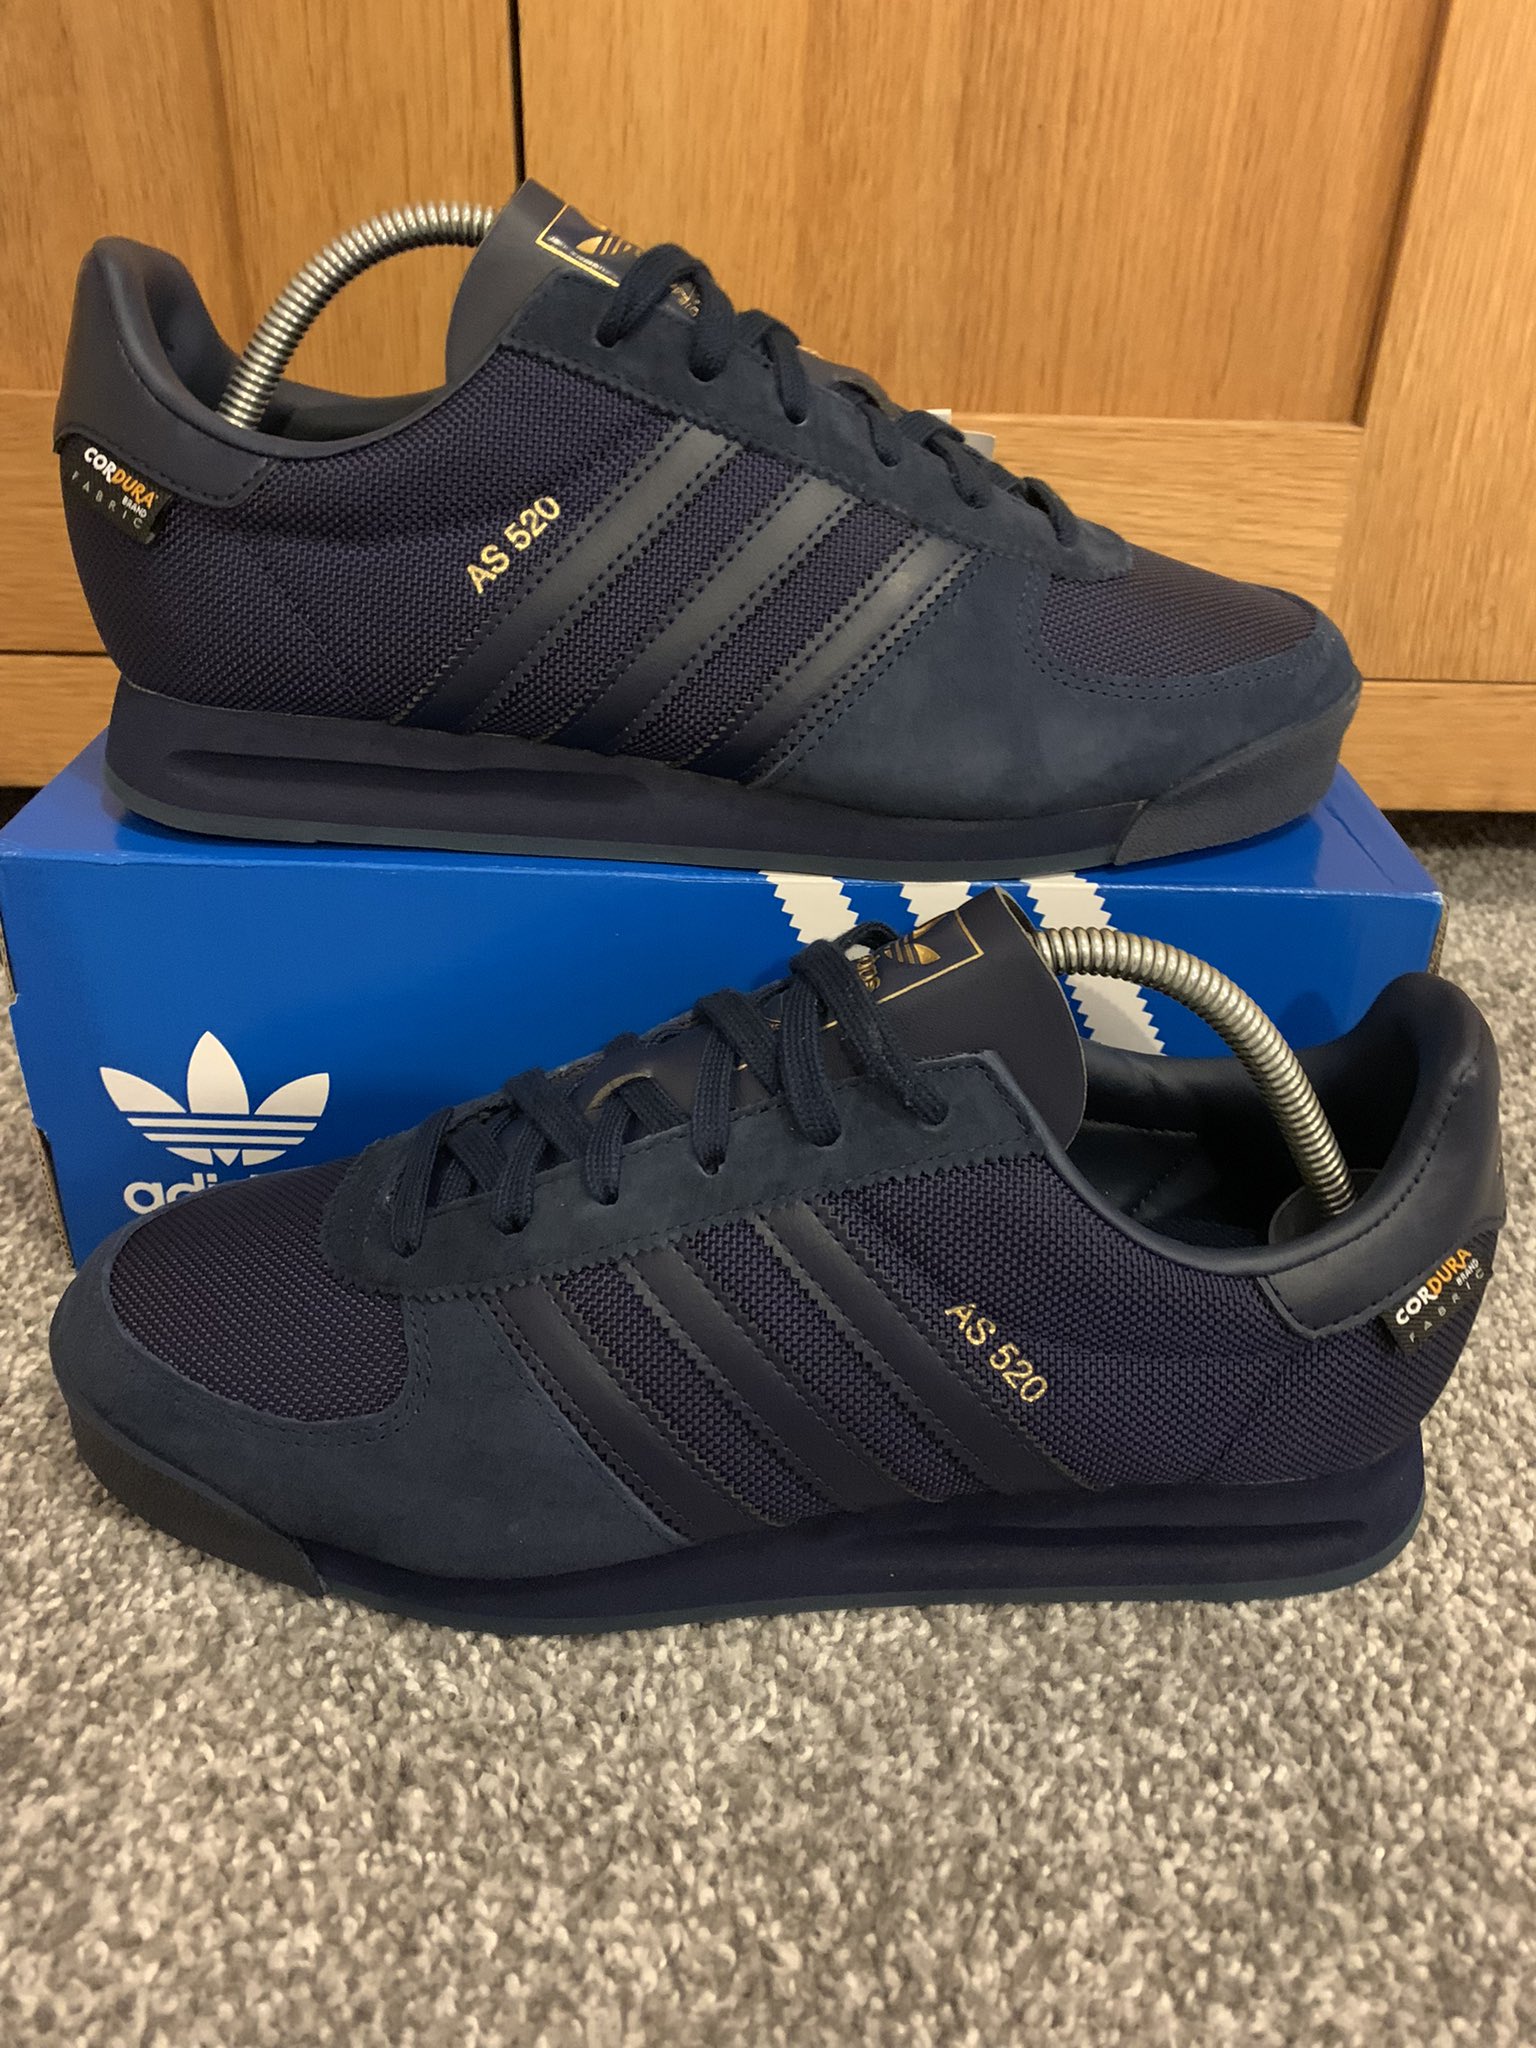 Ernz on Twitter: "Just home from work these beauties, very very nice shoe Adidas AS520 Cordura👌👌 #adidas #as520 #cordura #jd https://t.co/5G6Glz3V1I" / Twitter